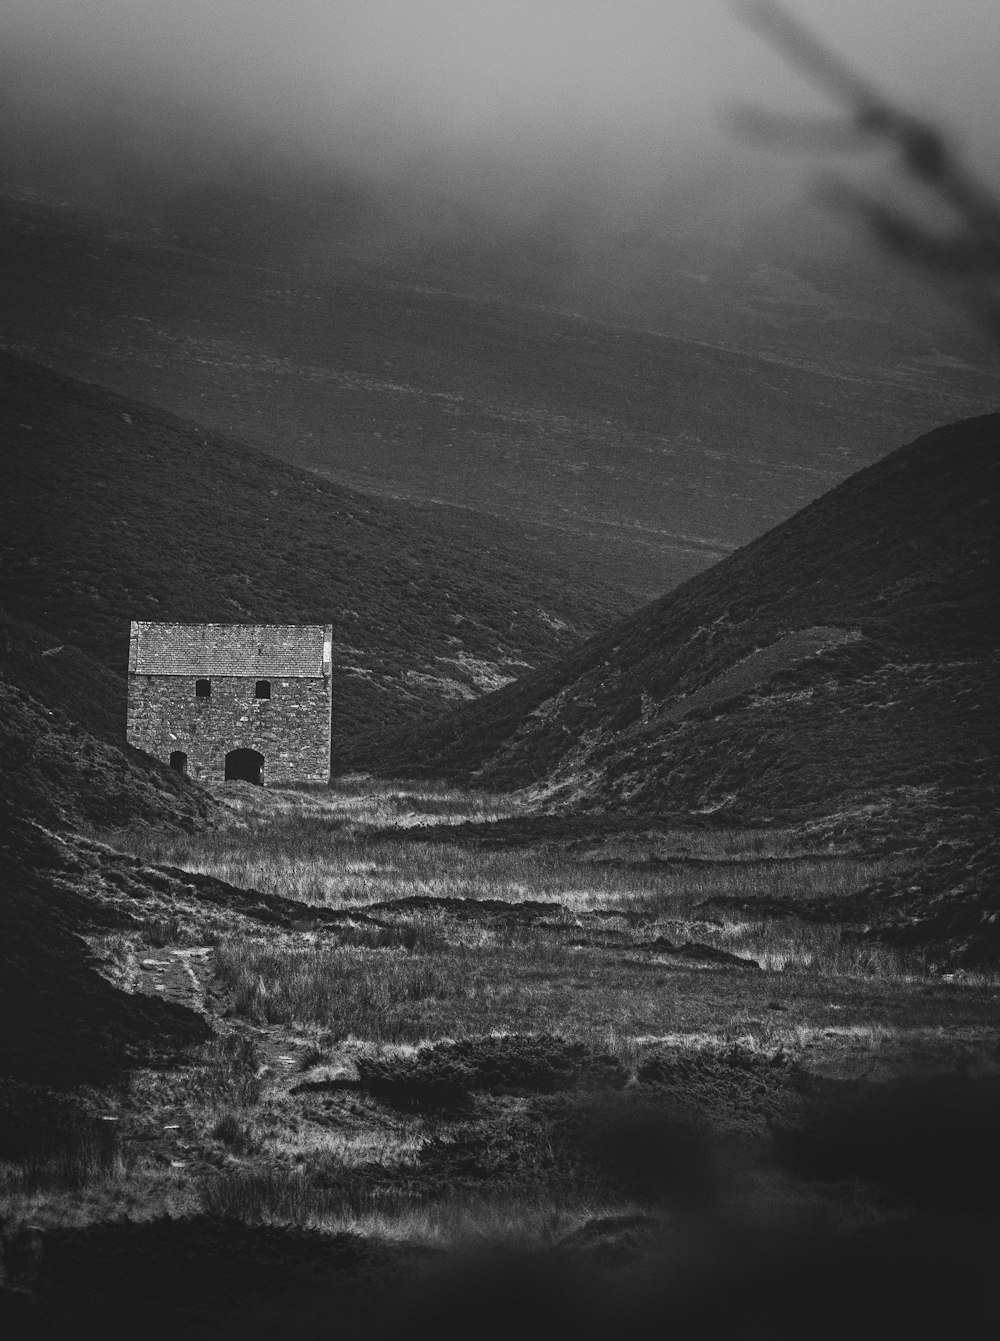 a black and white photo of a house in the mountains